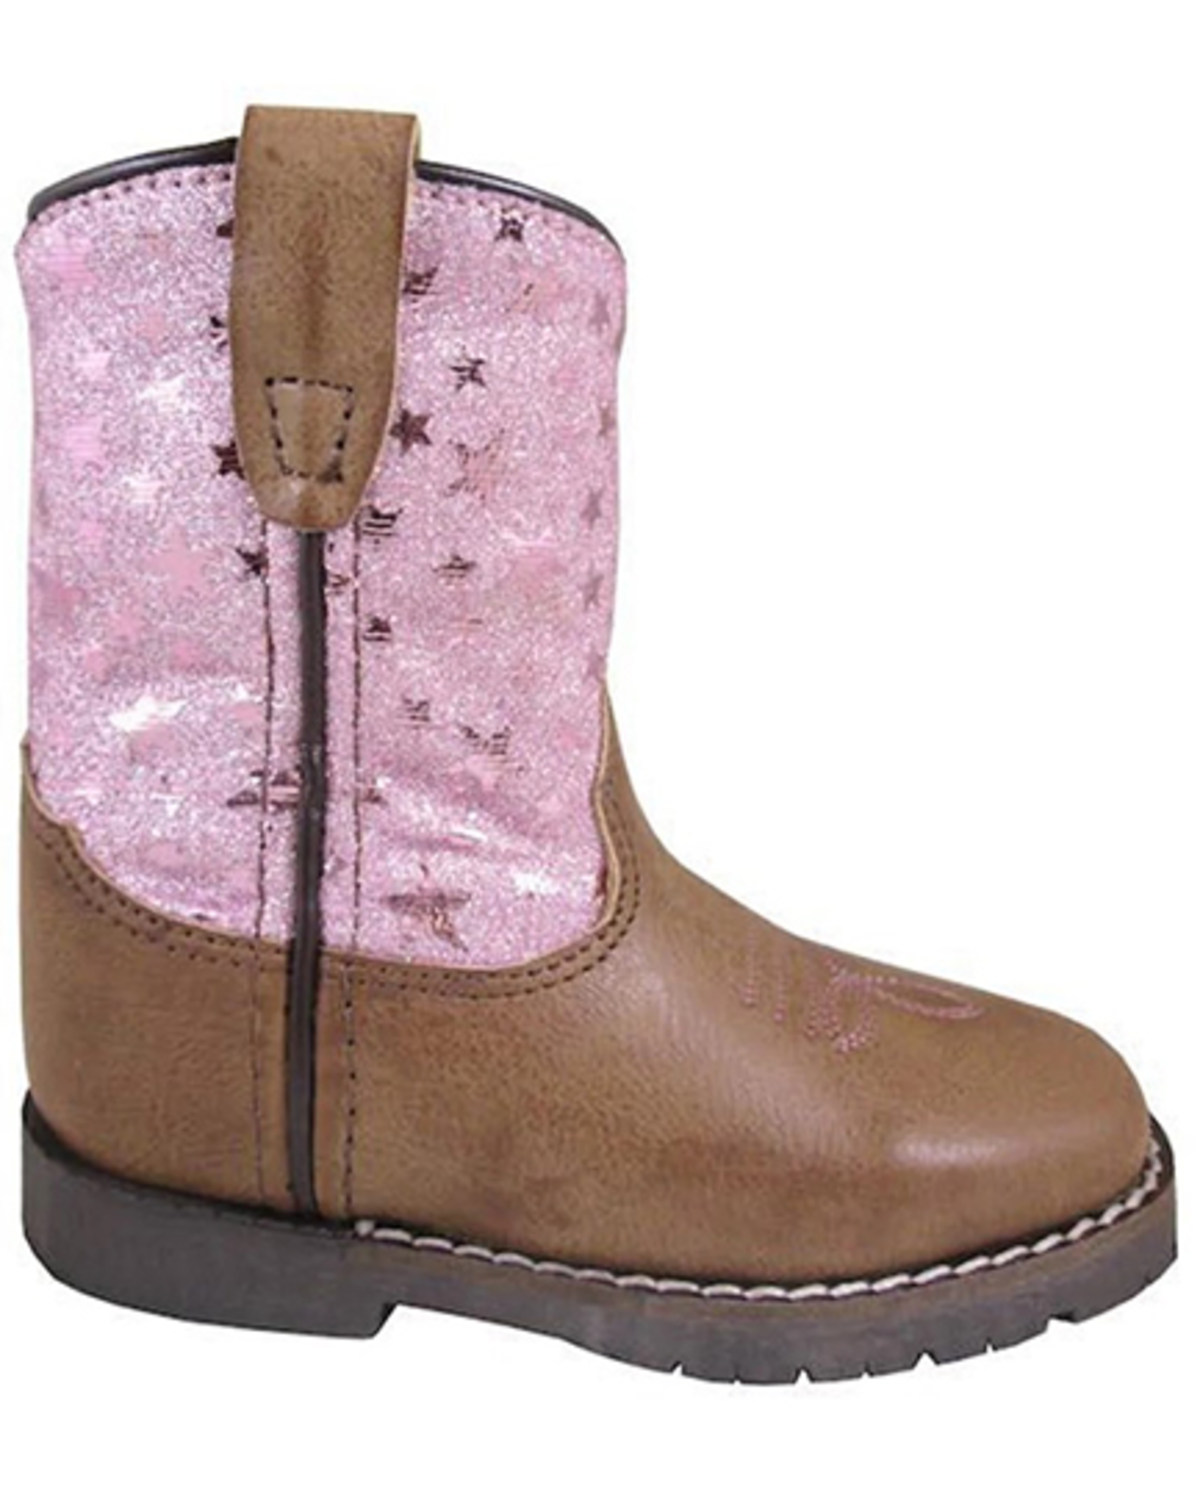 Smoky Mountain Toddler Girls' Autry Western Boots - Round Toe